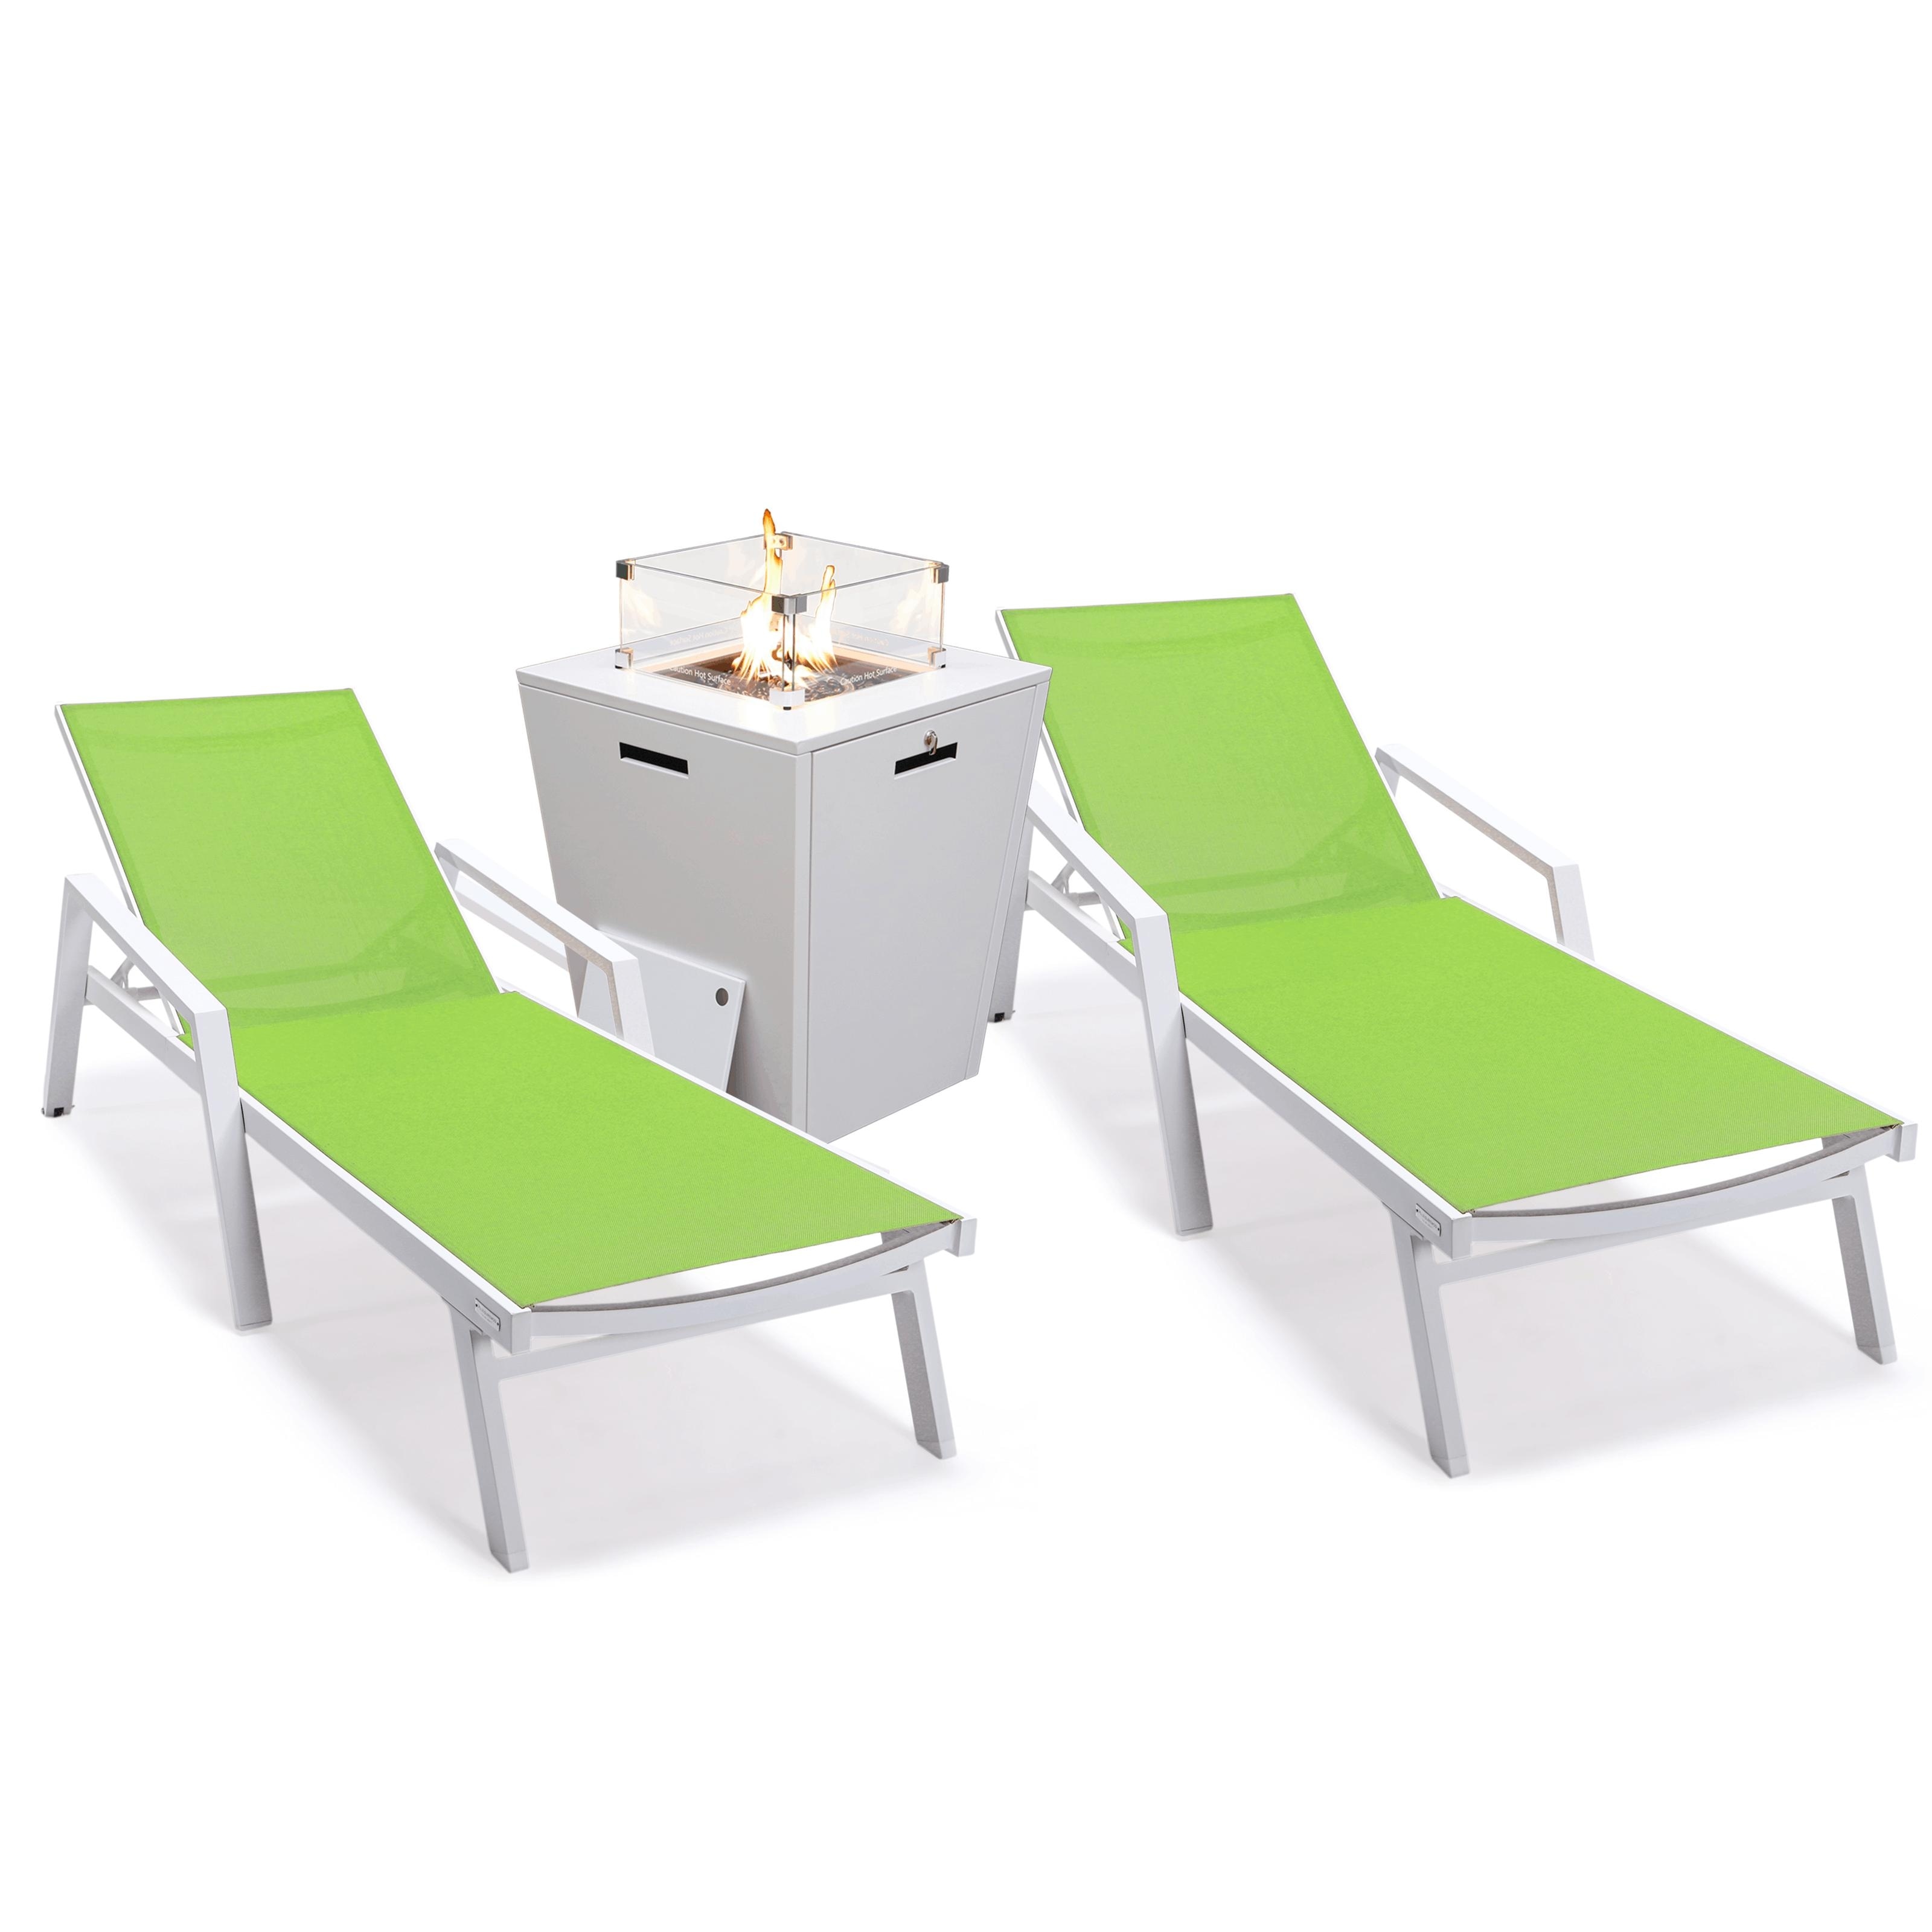 Leisuremod Marlin Chaise Lounge Chair Set Of 2 With Arms With Fire Pit Table